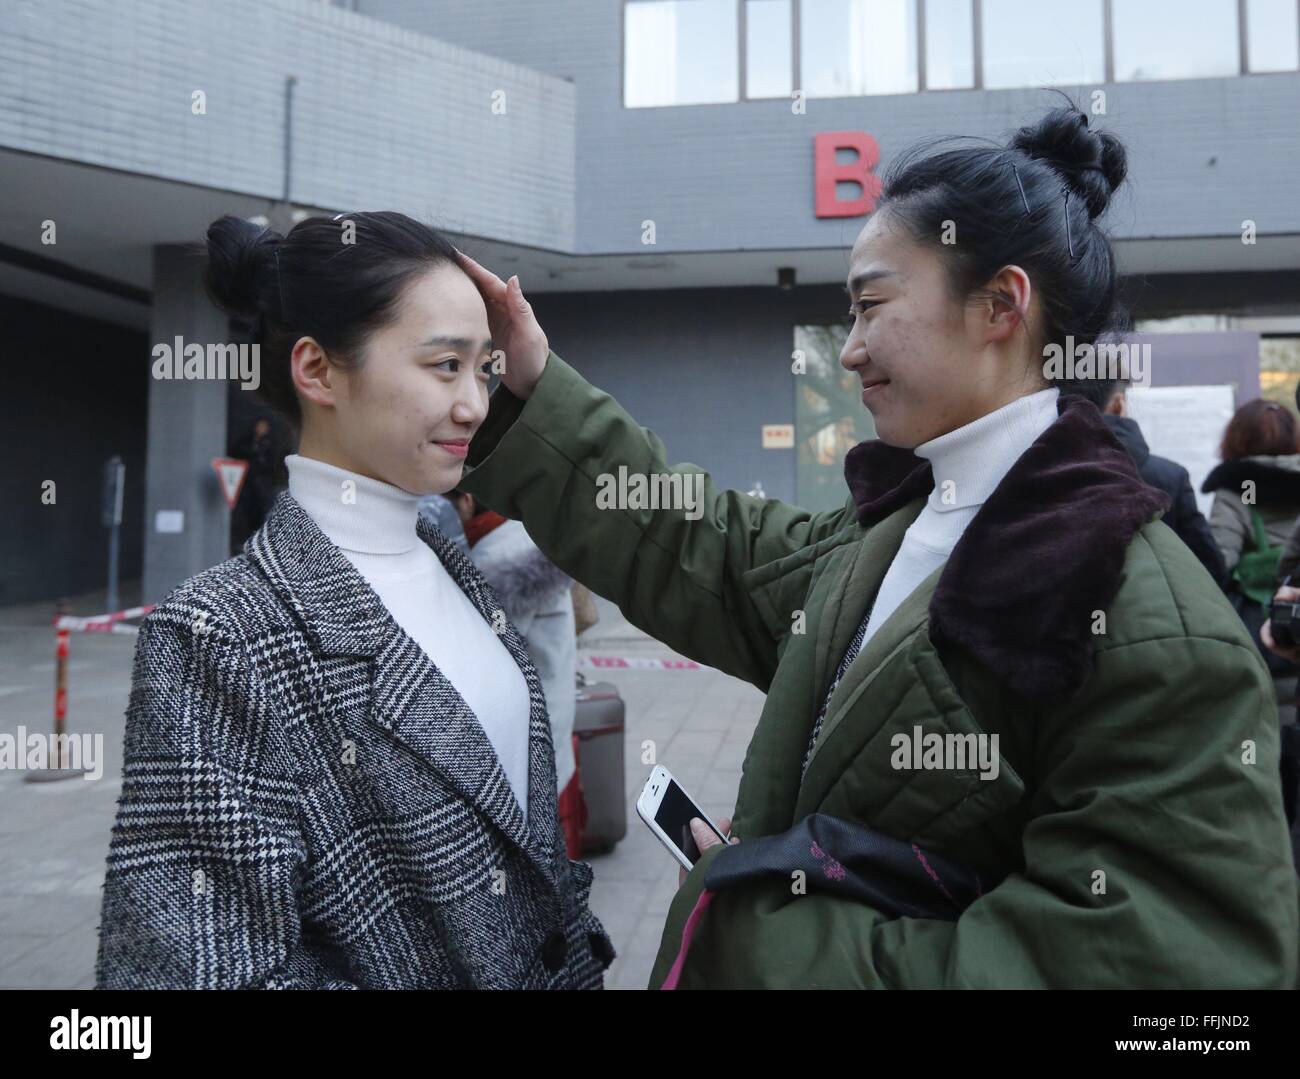 (160215) -- BEIJING, Feb. 15, 2016 (Xinhua) -- Candidate Li Lujia (R) combs her twin sister Li Luxi's hair outside the examination hall at Beijing Film Academy (BFA) in Beijing, capital of China, Feb. 15, 2016. The annual entrance exam of China's art colleges including BFA, the Central Academy of Drama and the Communication University of China started simultaneously on Monday. Over 7,600 applicants for BFA's performance institute will take part in the exam to vie for 45 vacancies in the institute. Some Chinese young people regarded studying in an art college as a shortcut to become famous in r Stock Photo